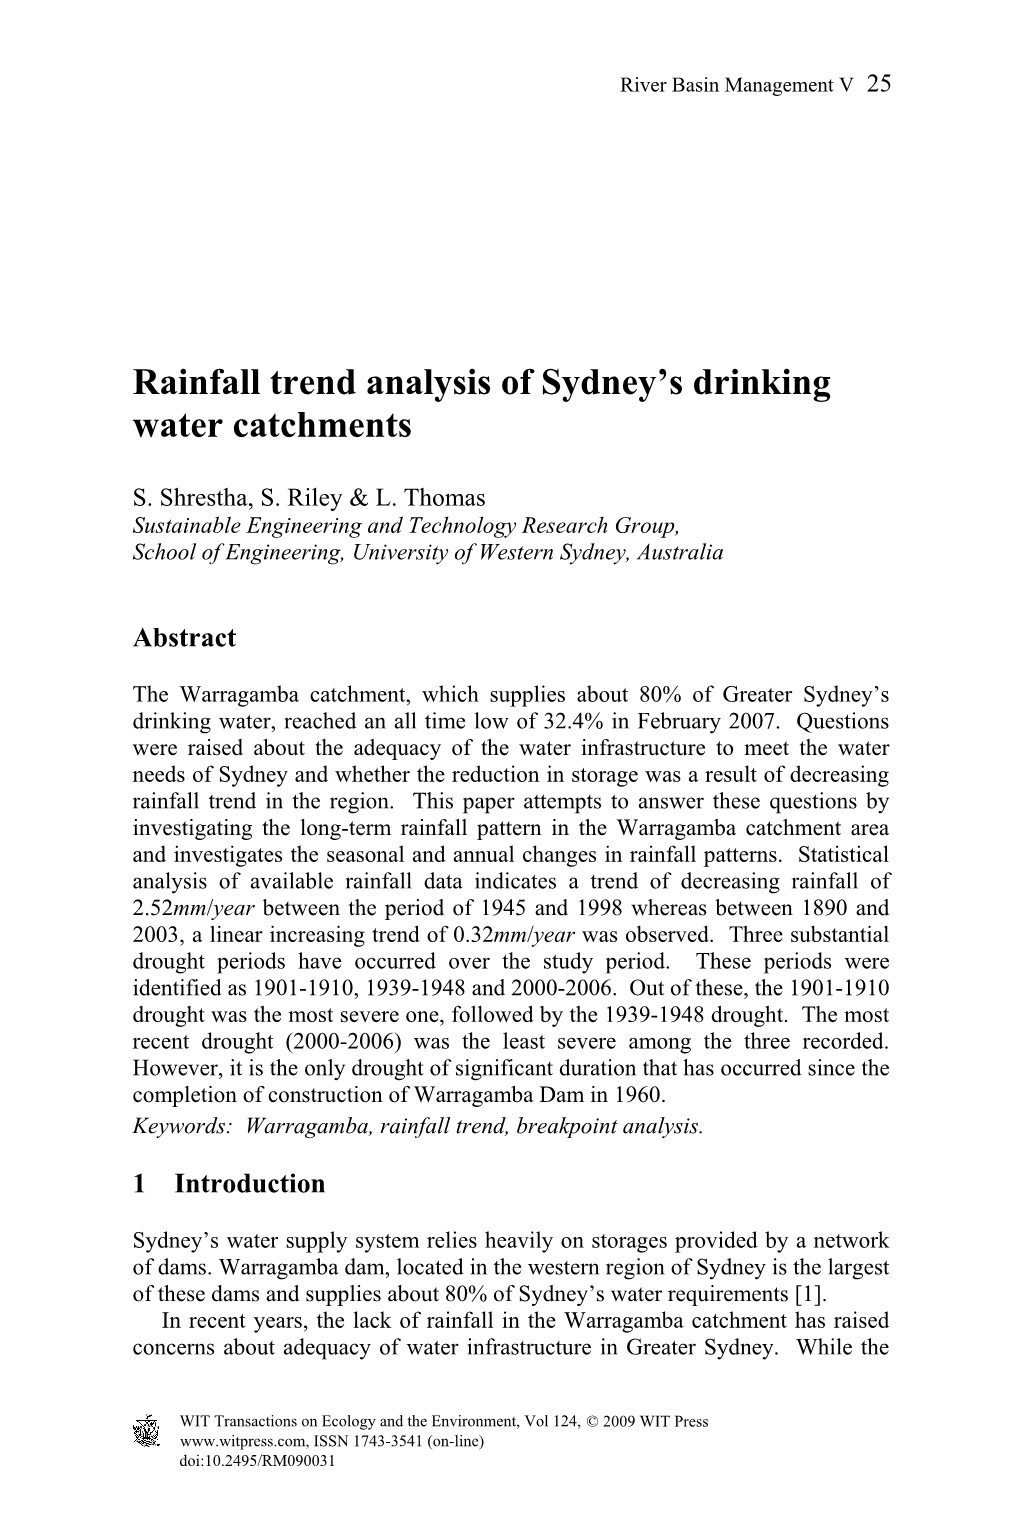 Rainfall Trend Analysis of Sydney's Drinking Water Catchments